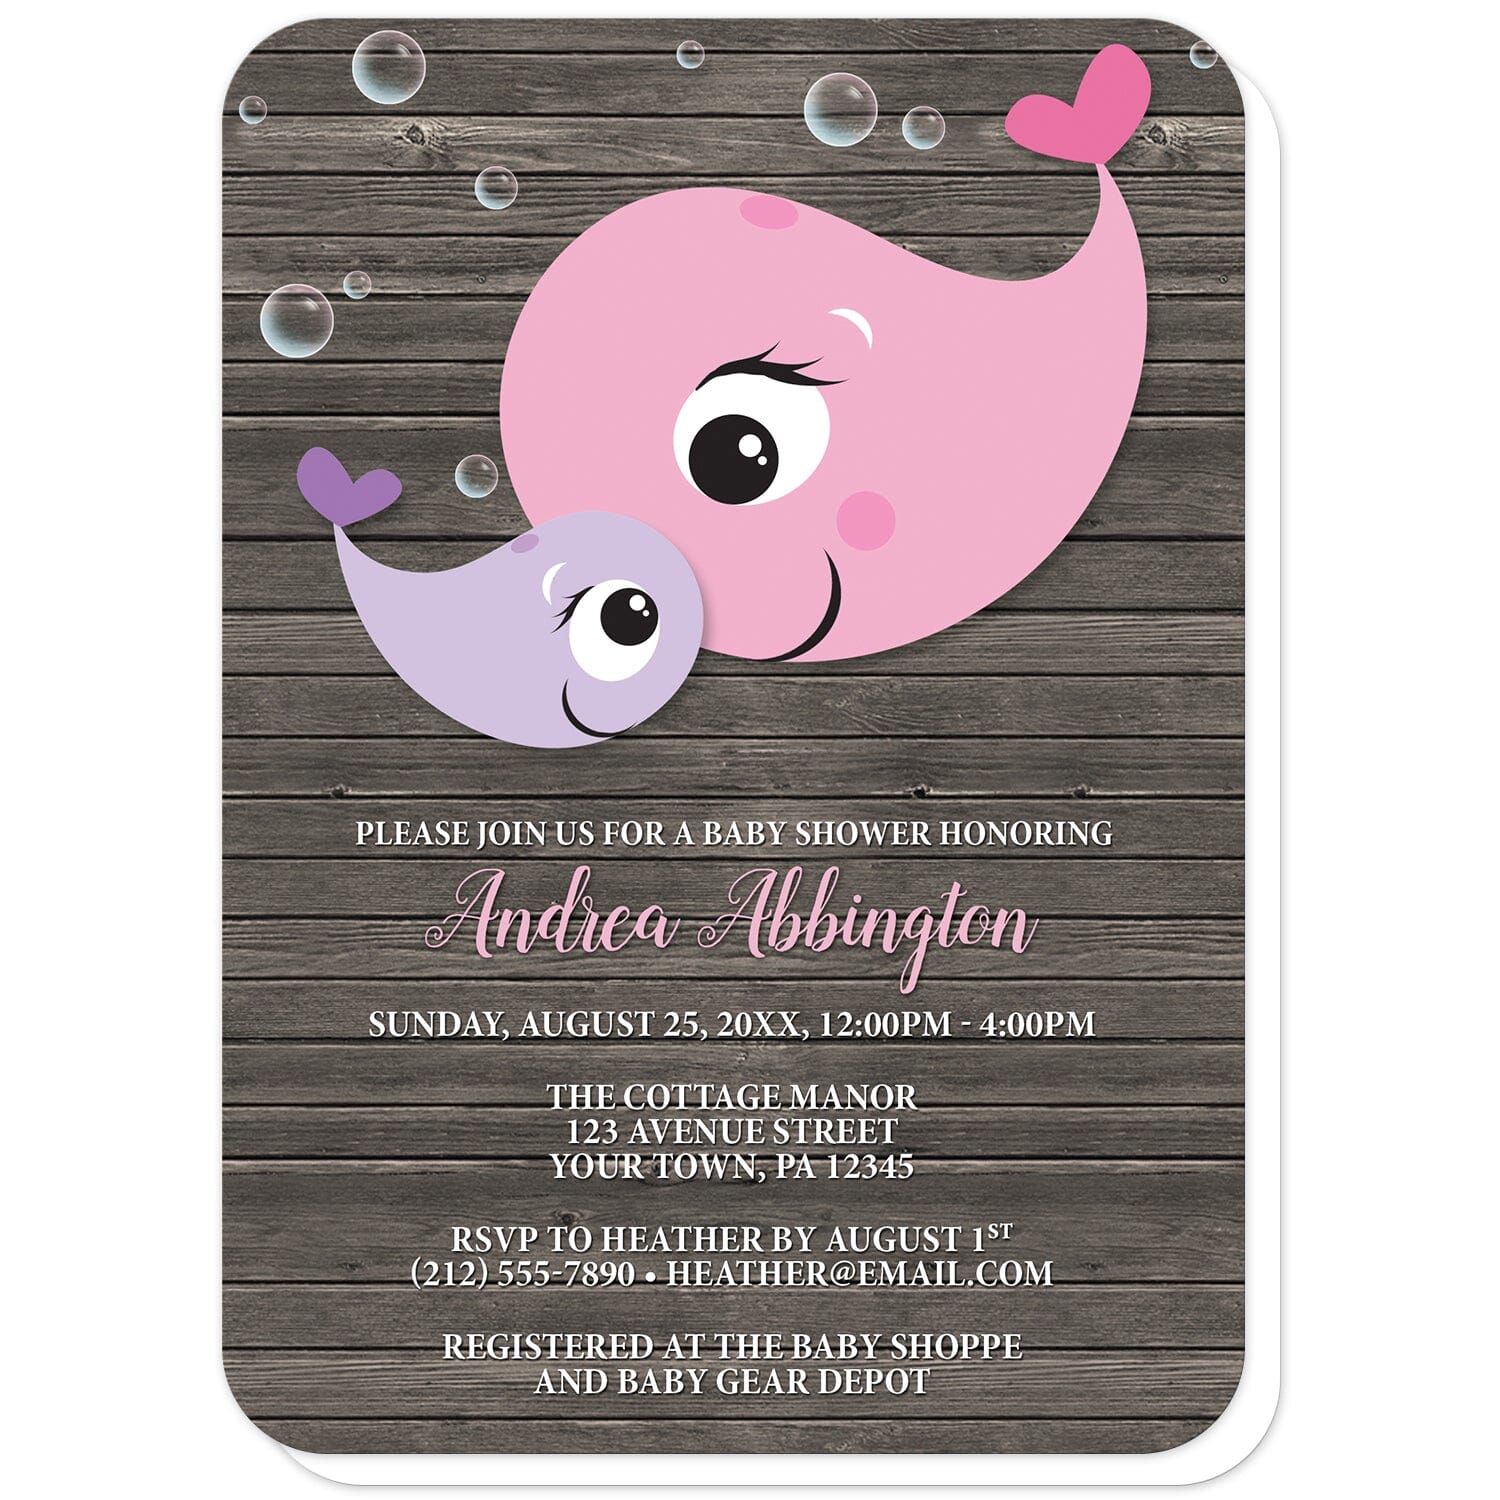 Mommy Baby Girl Whale Rustic Wood Baby Shower Invitations (with rounded corners) at Artistically Invited. Mommy baby girl whale rustic wood baby shower invitations with a cute illustration of a pink mommy whale and purple baby whale with translucent bubbles around them, over a dark brown wood background. Your personalized baby shower celebration details are custom printed in white with the mom-to-be's name printed in a pink script font over the wood background.